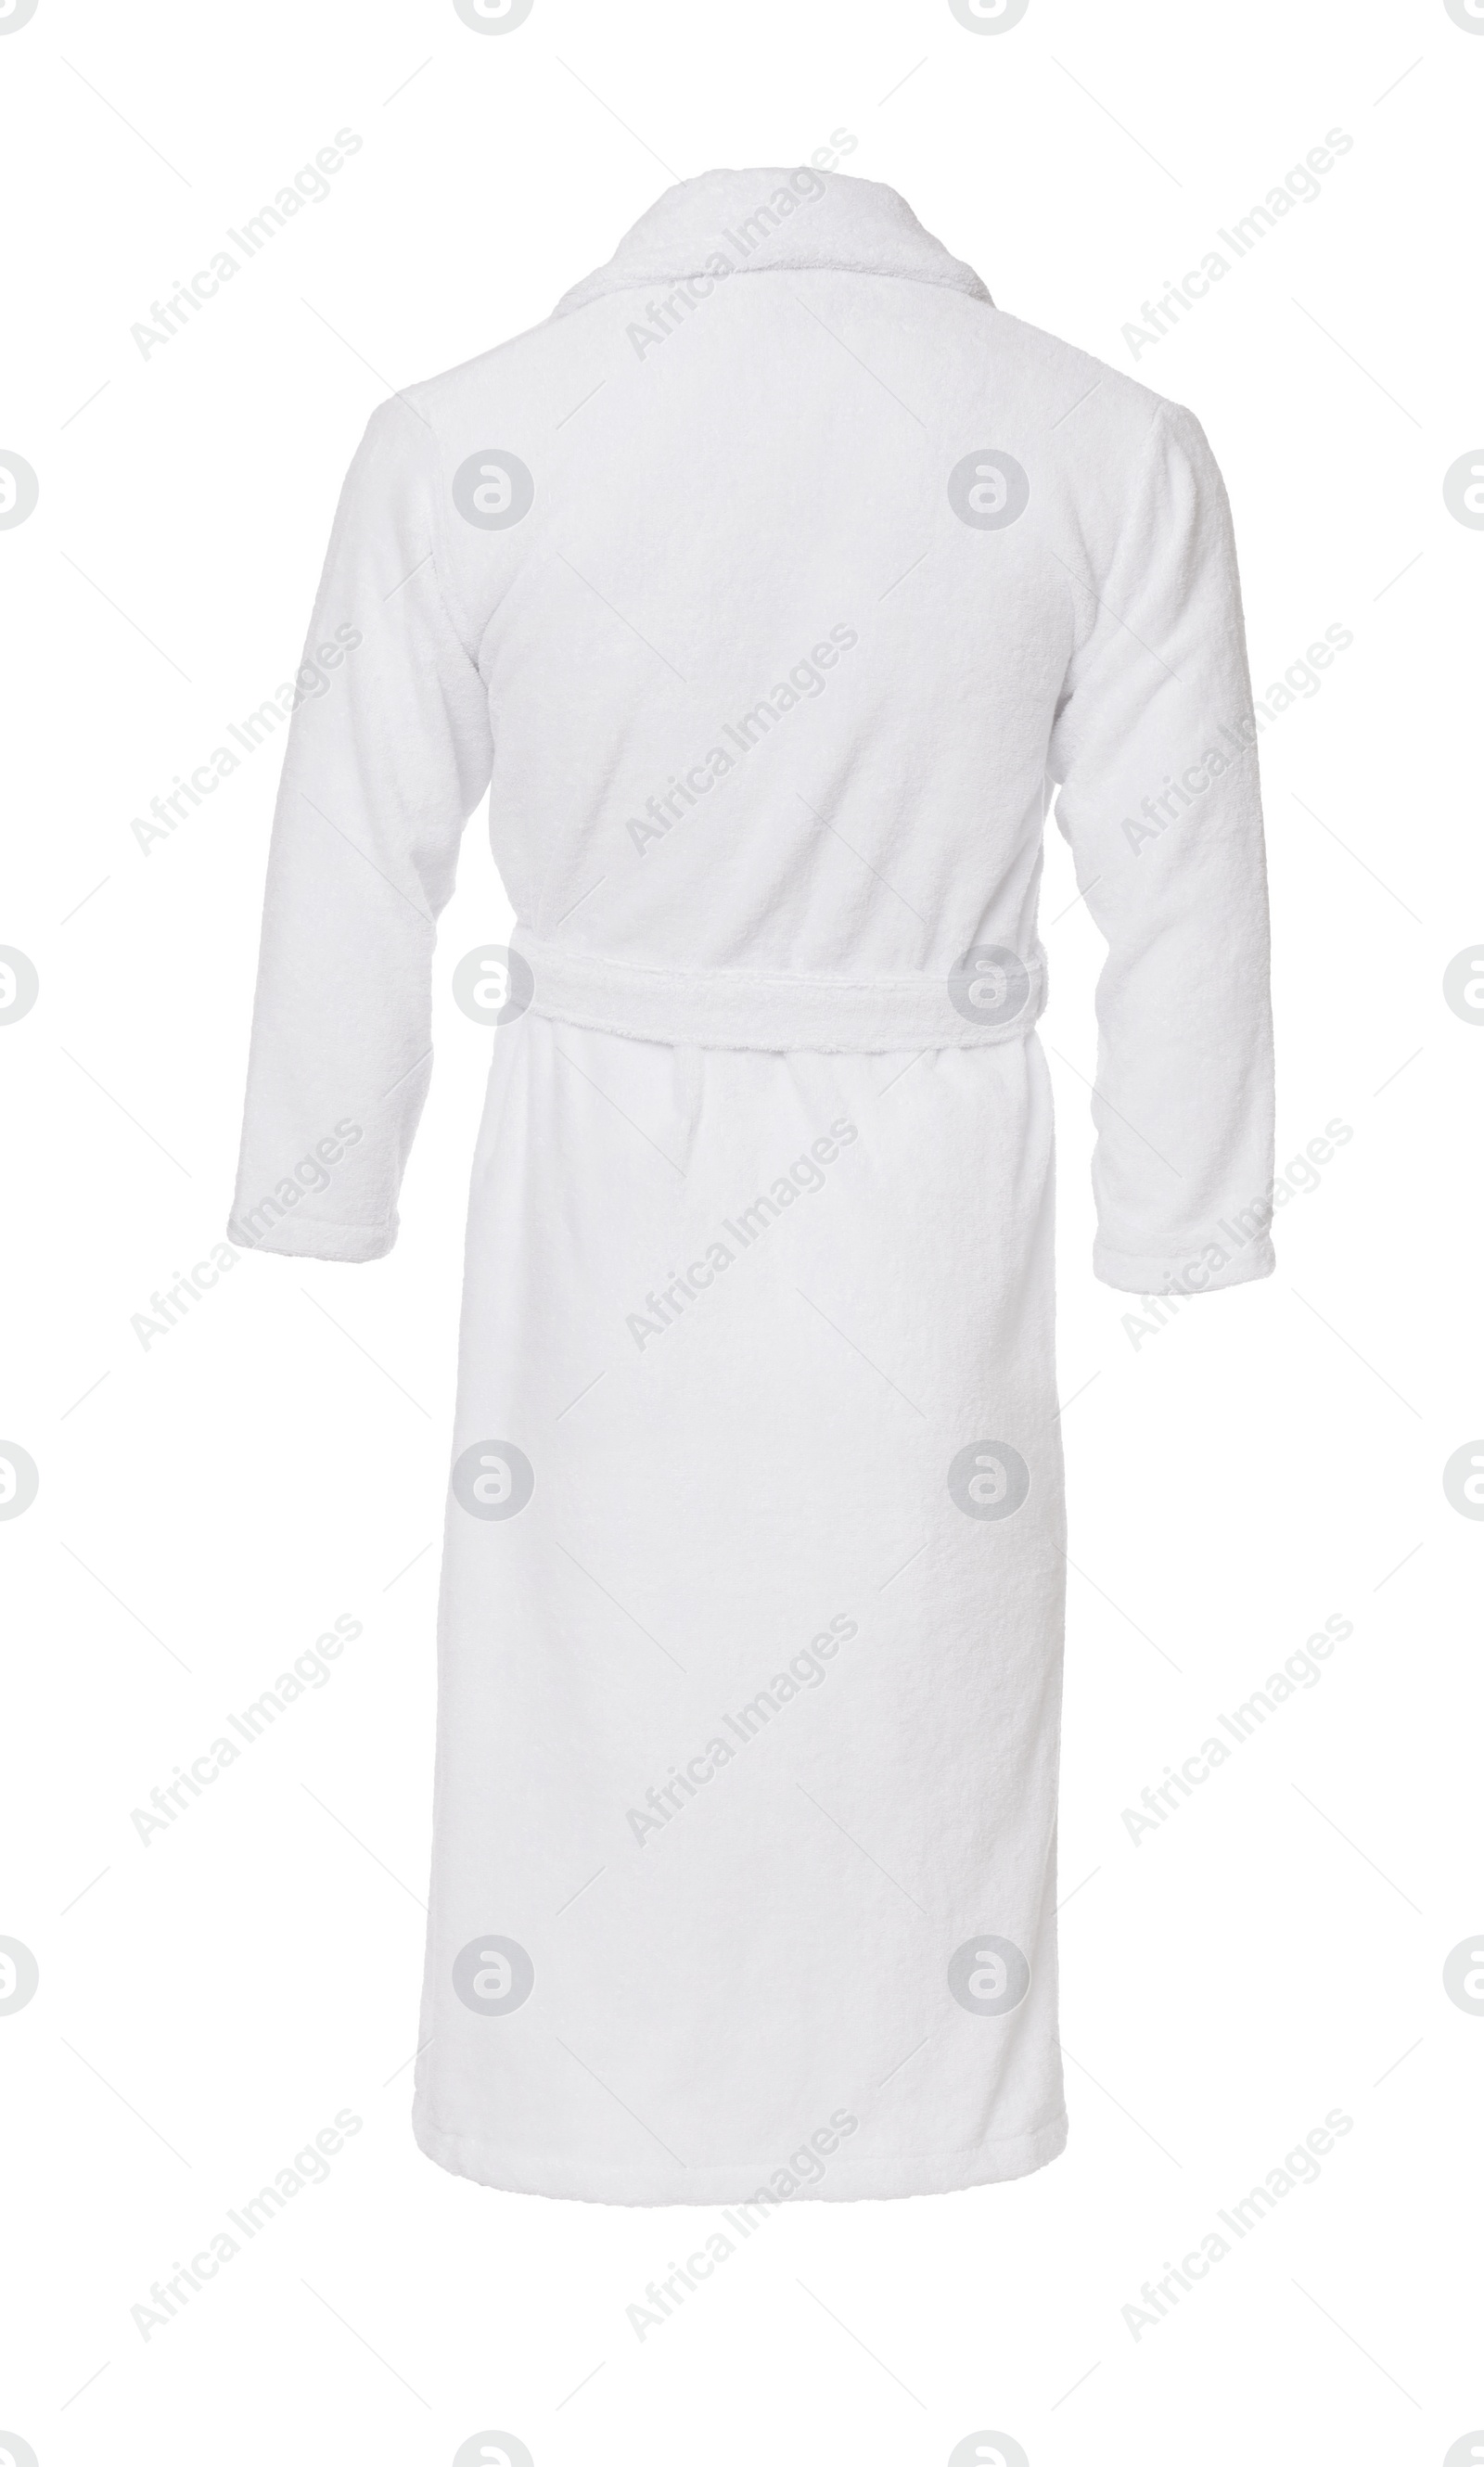 Image of Soft clean terry bathrobe isolated on white, back view